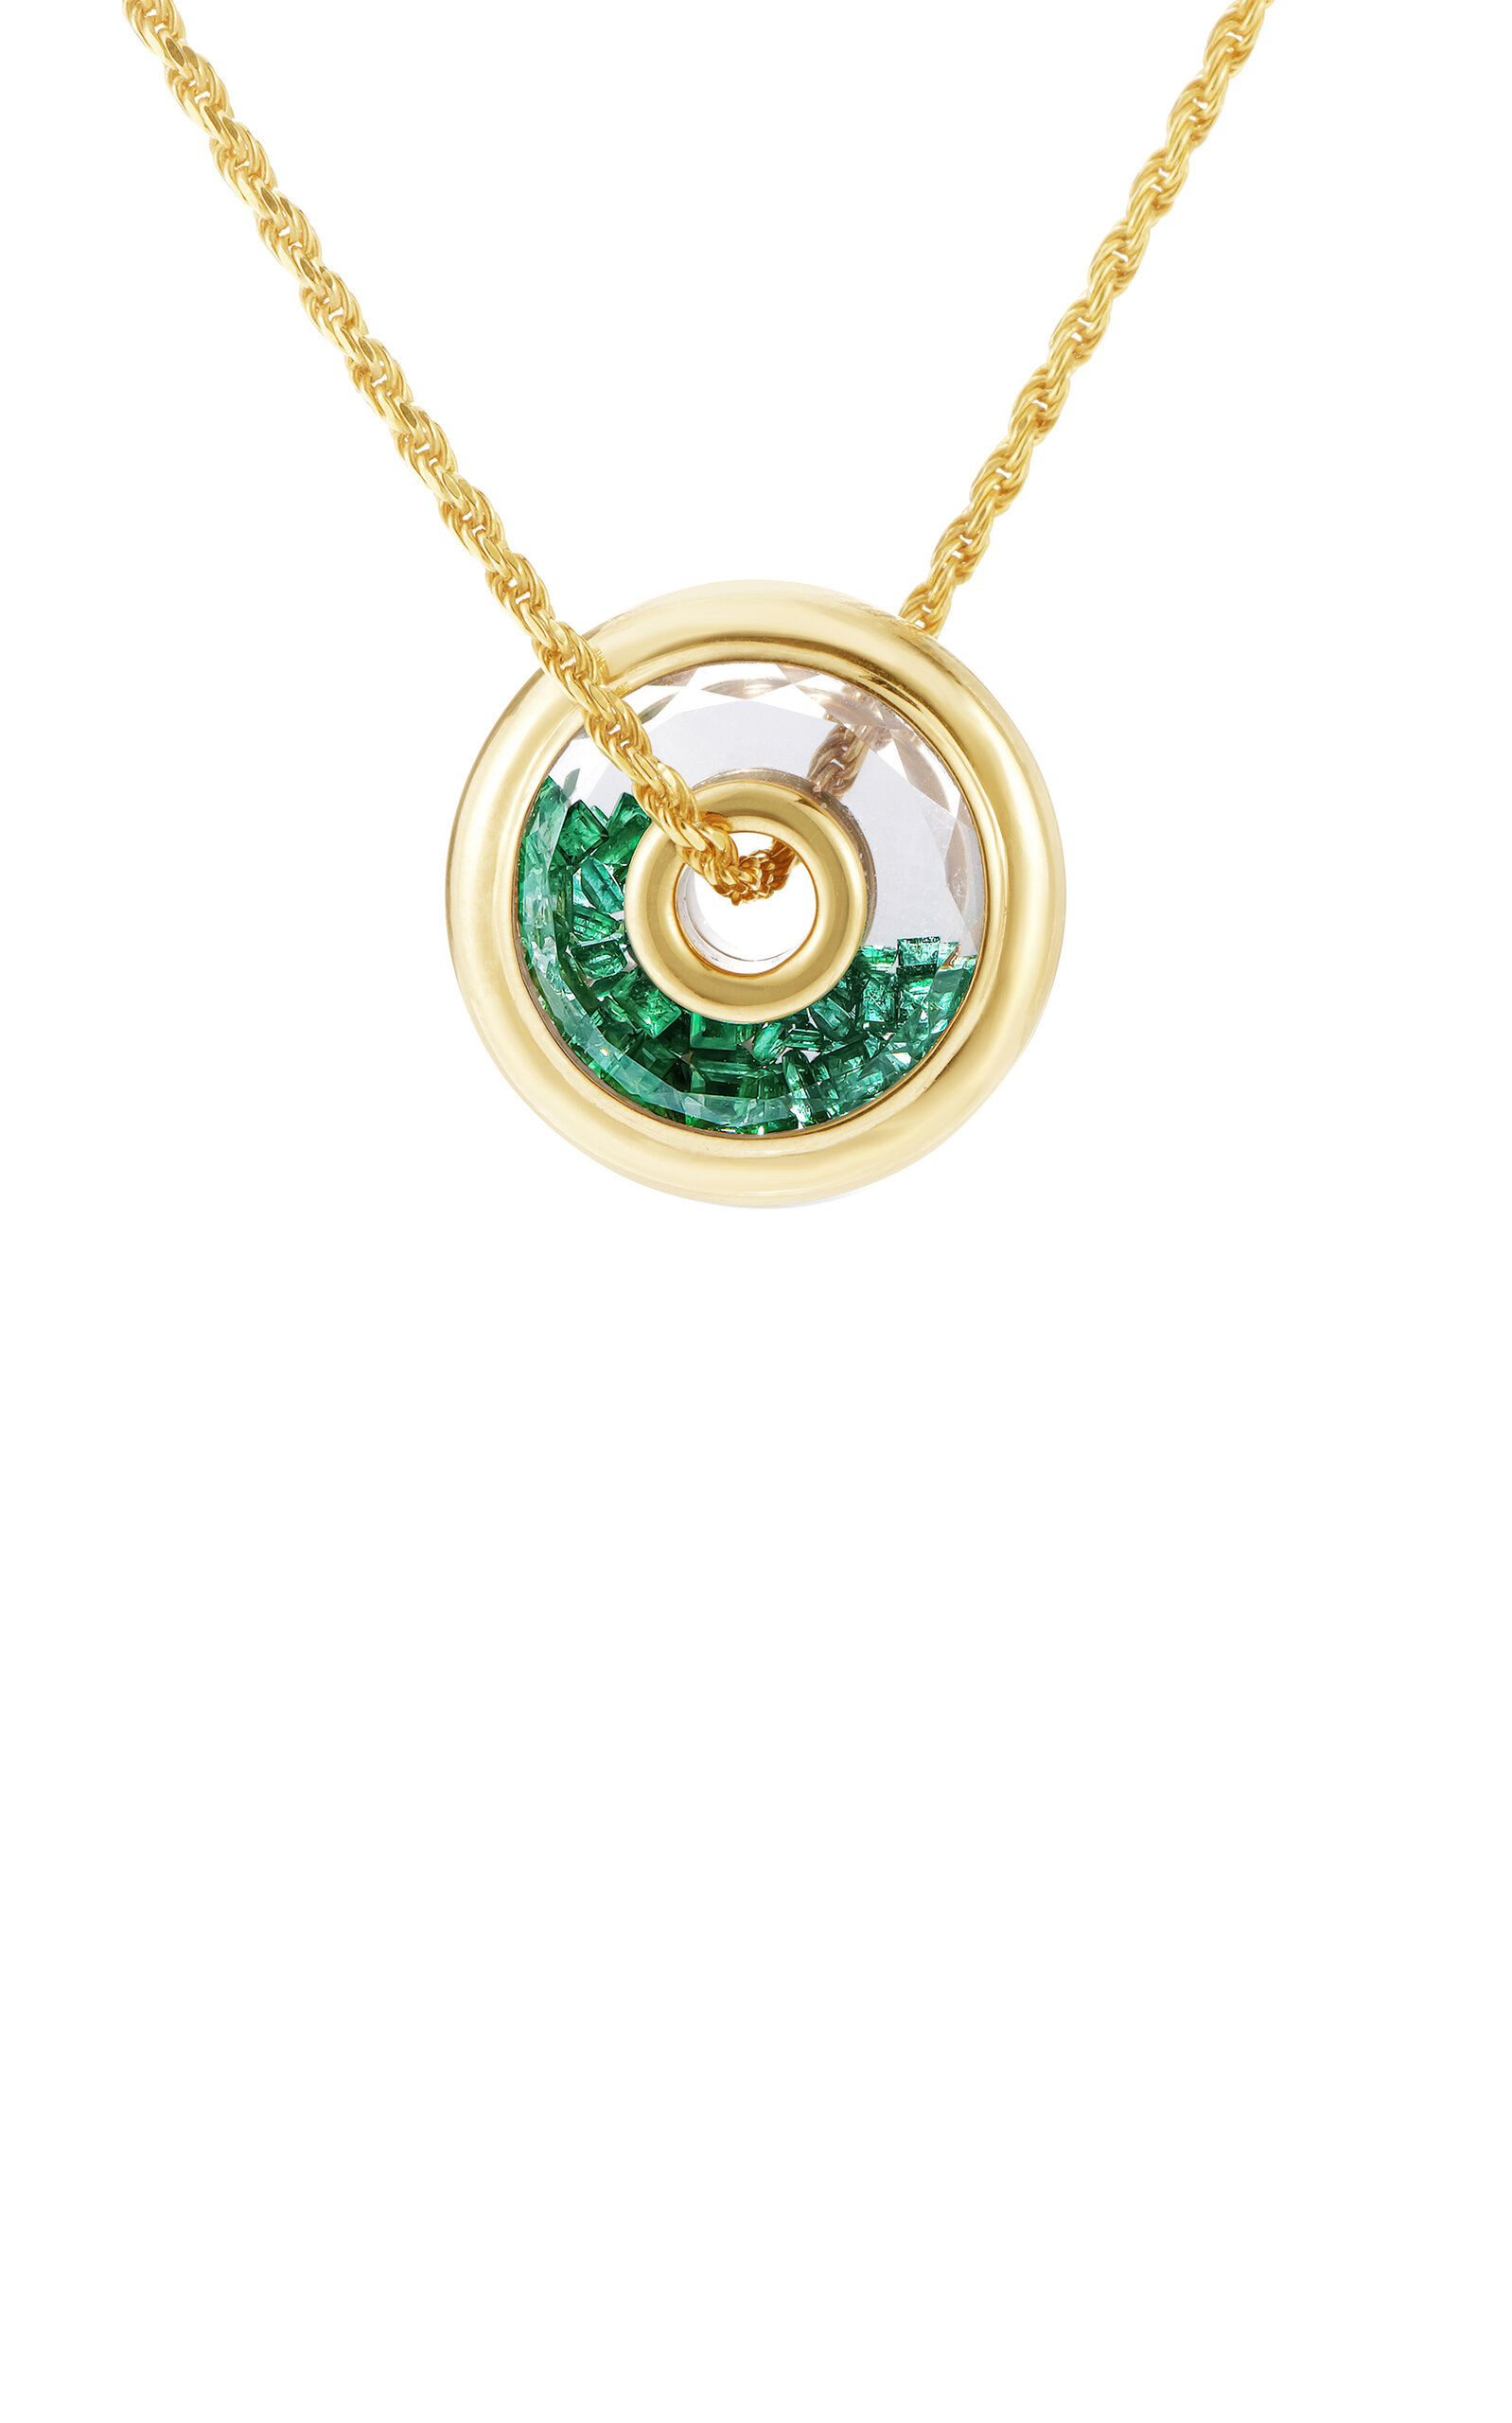 18k Yellow Gold Roda 15 Pendant Necklace with Emeralds